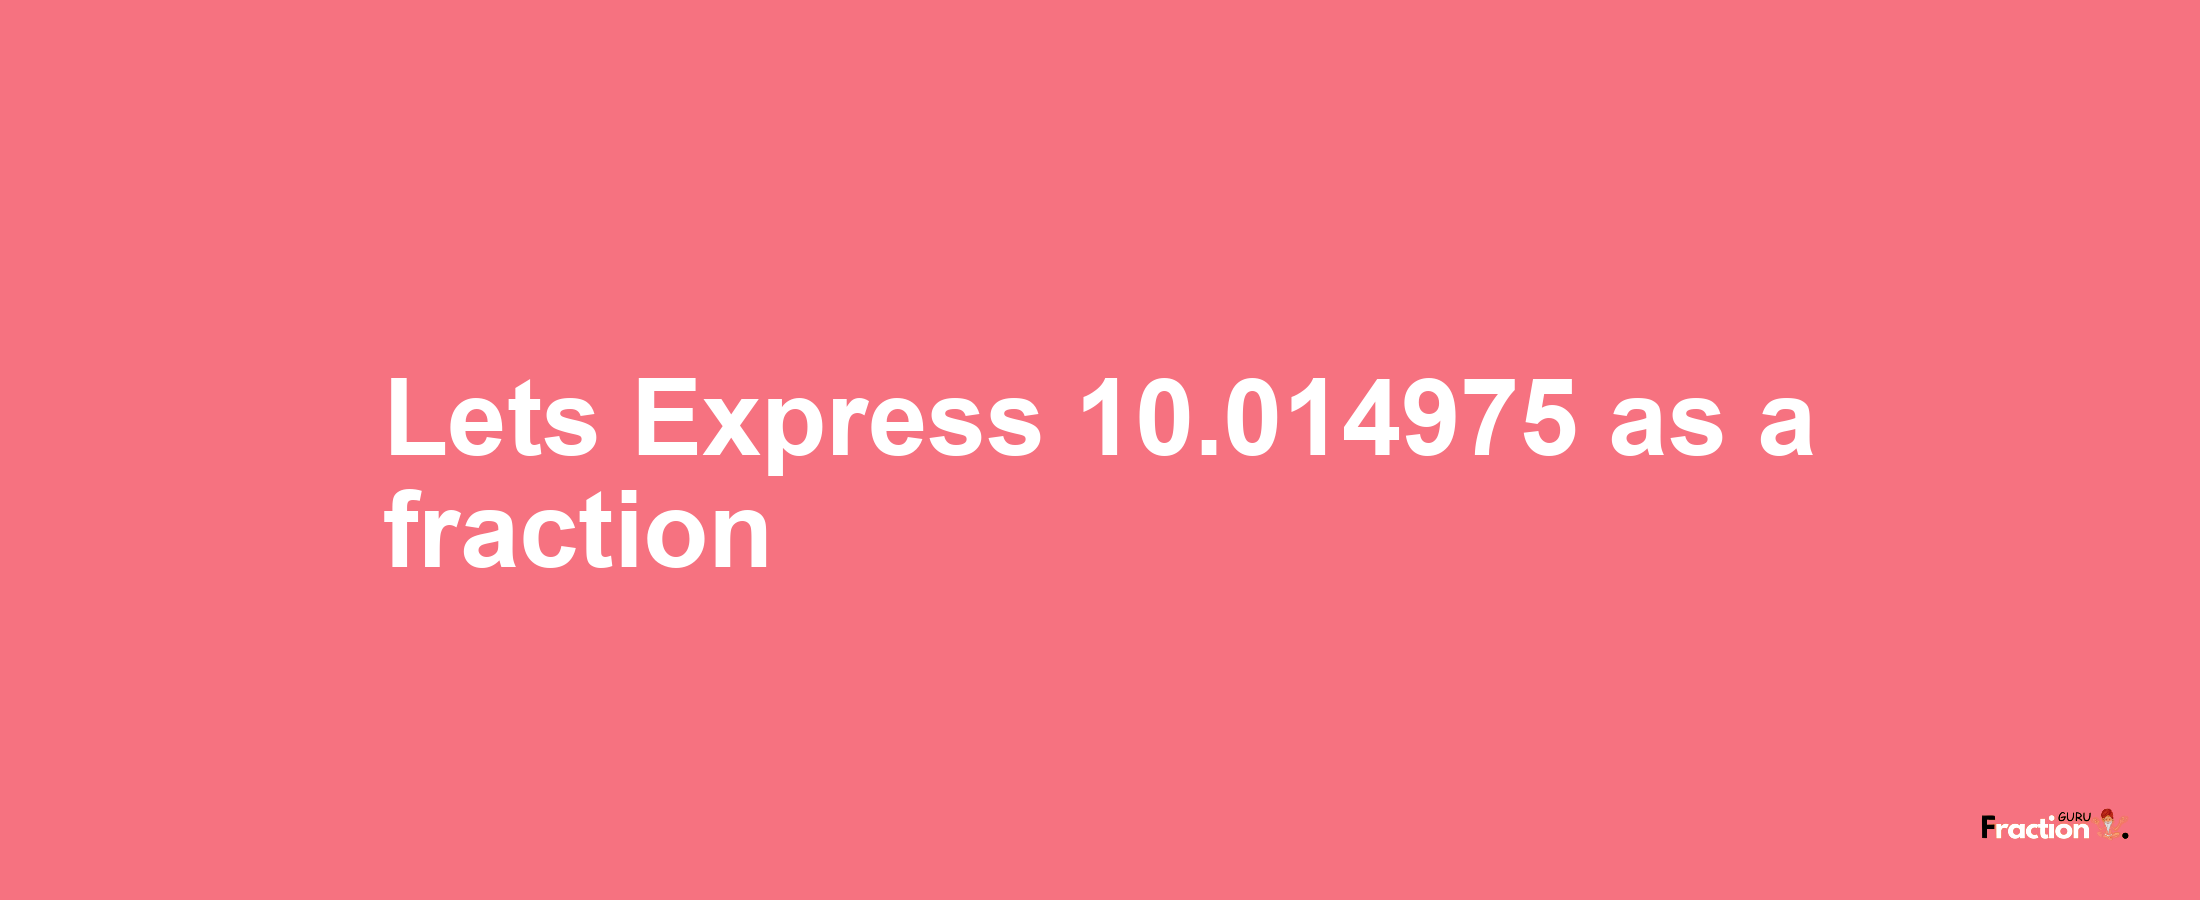 Lets Express 10.014975 as afraction